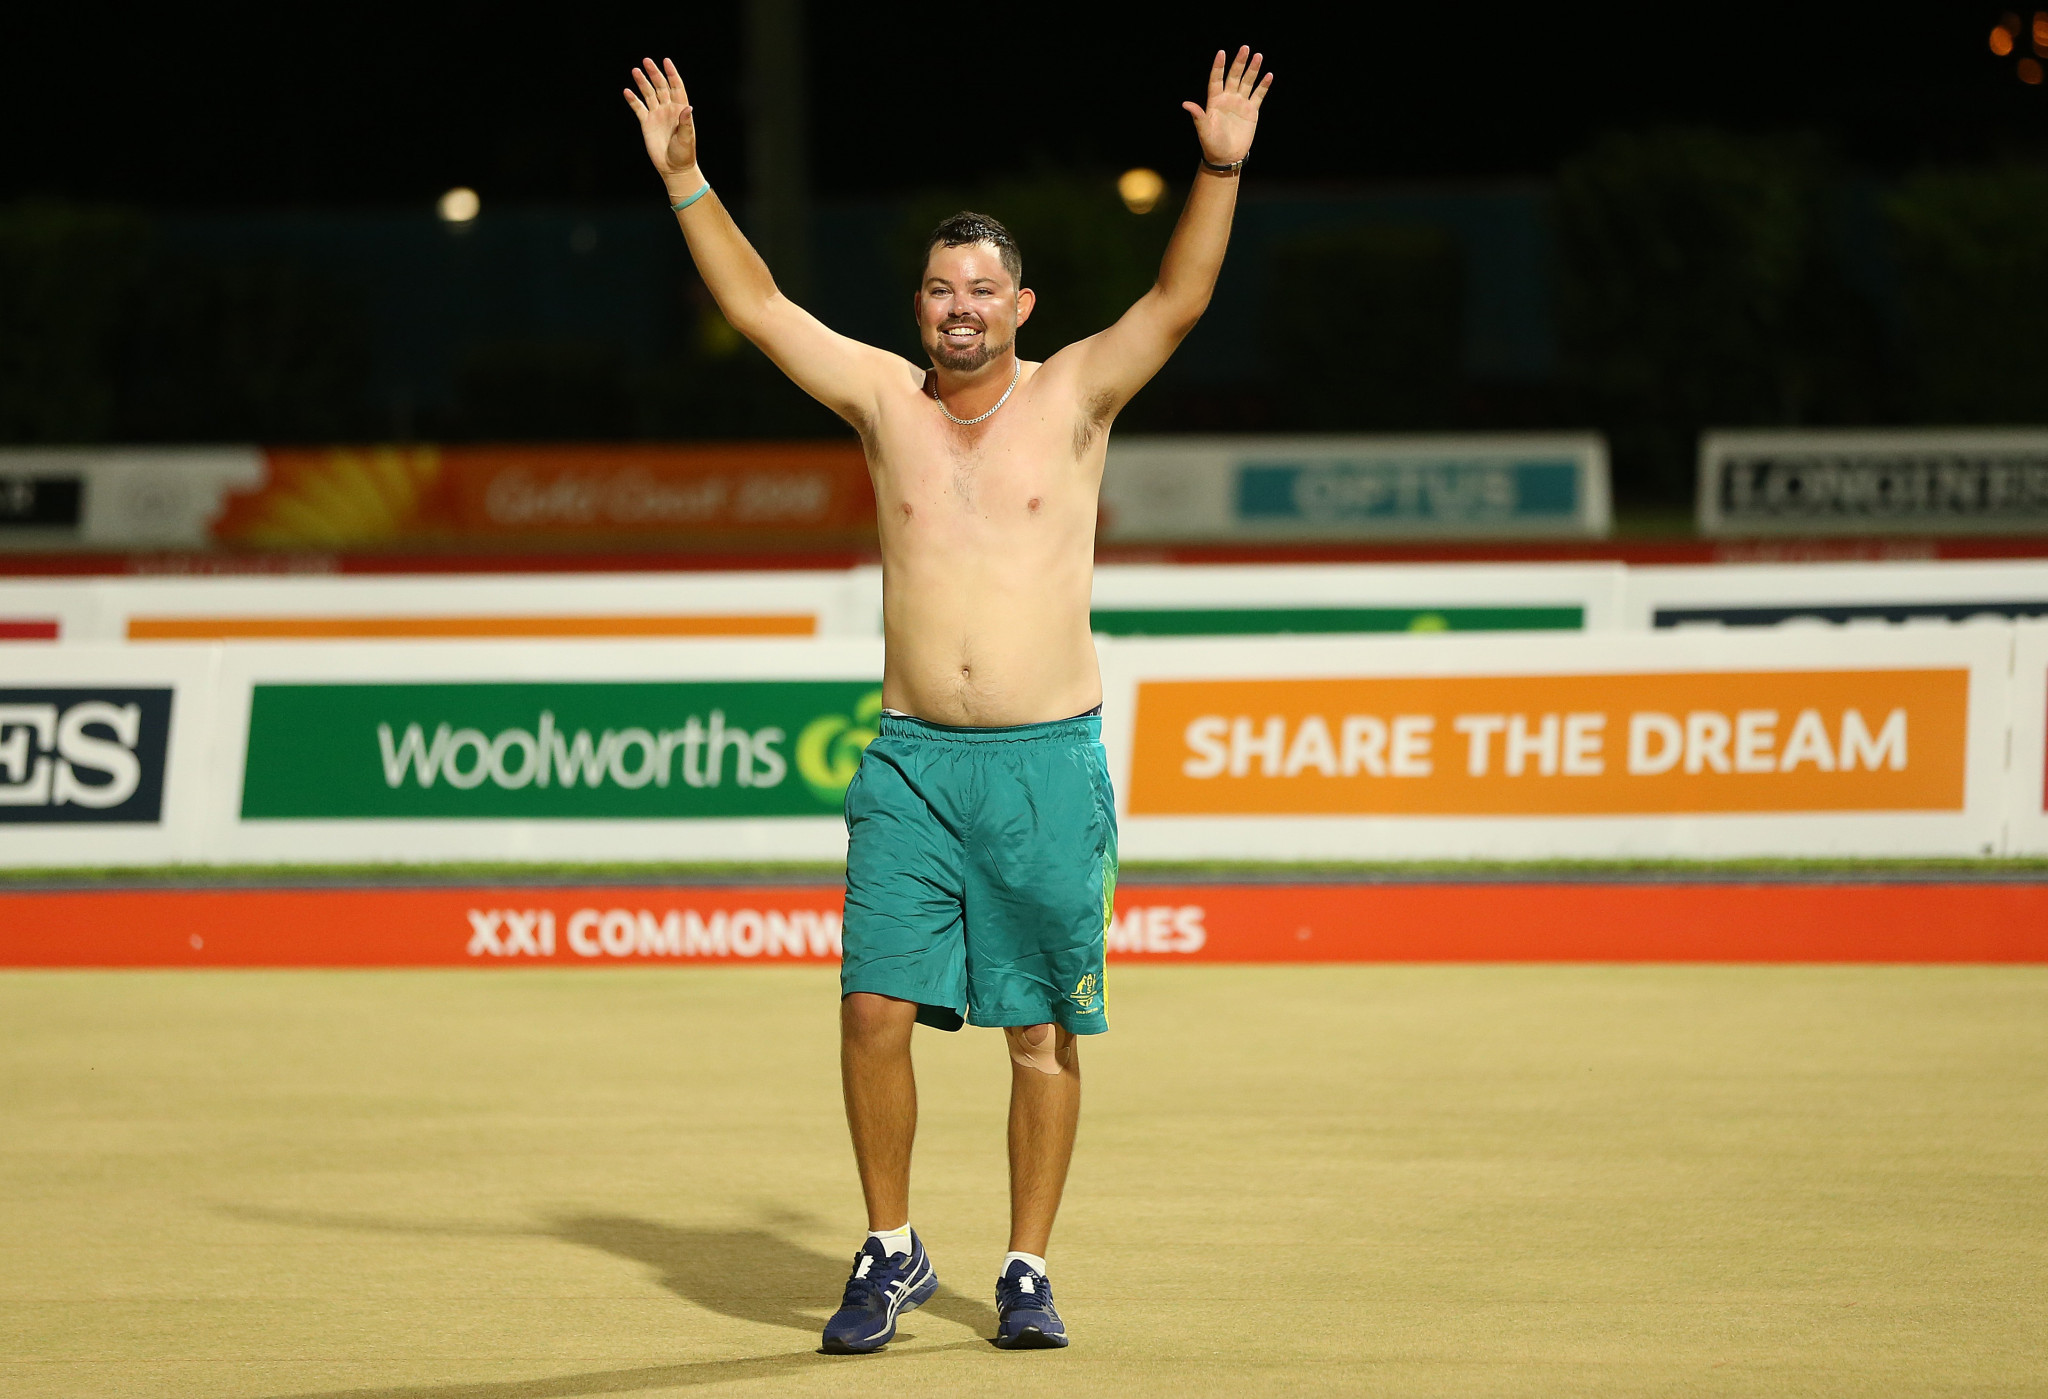 Australia's Aaron Wilson celebrated his triumph in the men's singles lawn bowls event by taking off his t-shirt ©Getty Images